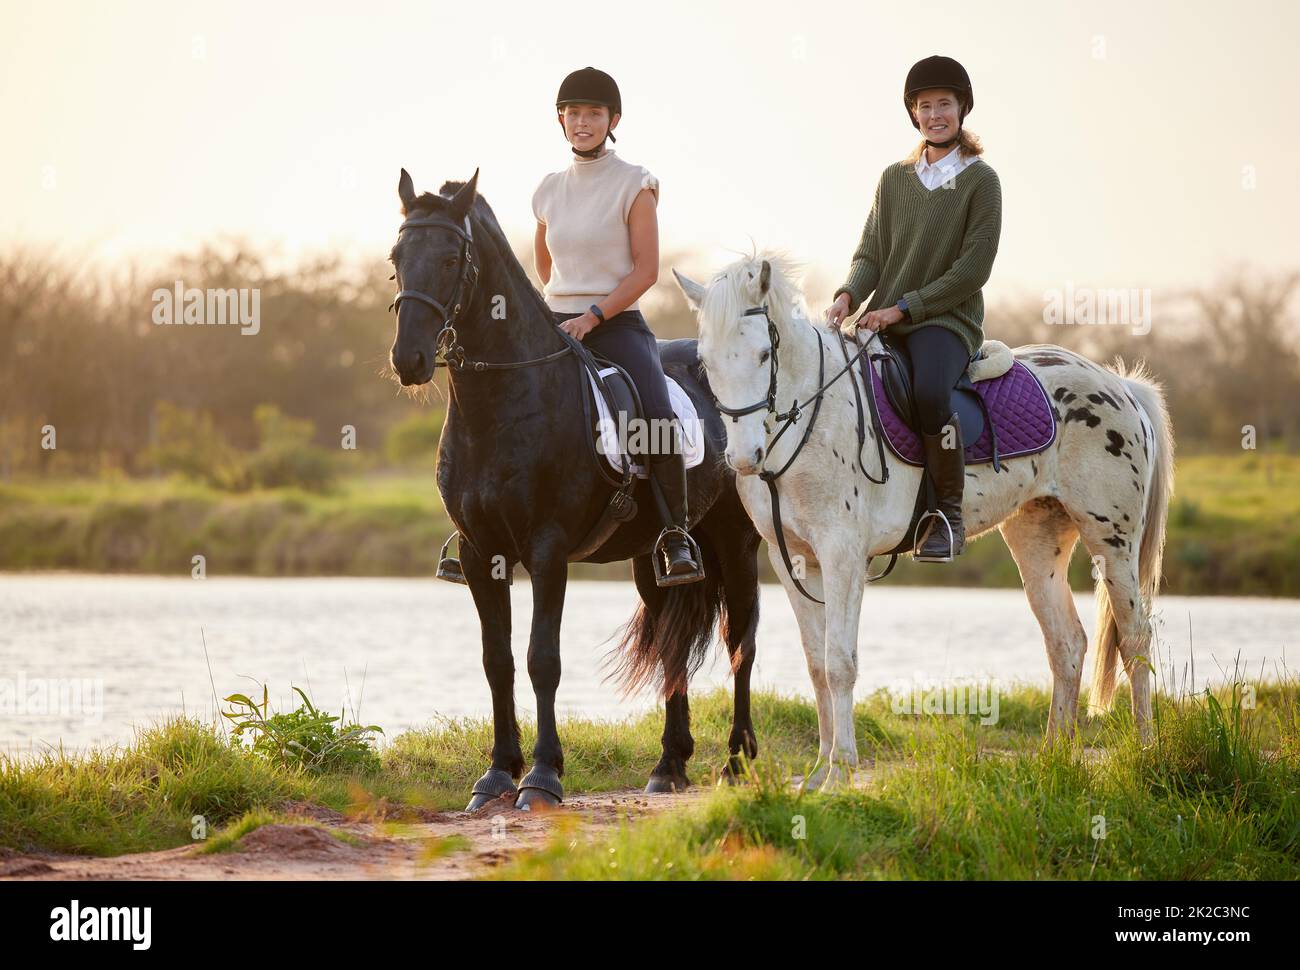 Horses are powerful yet majestic. Shot of two young women riding their horses outside on a field. Stock Photo